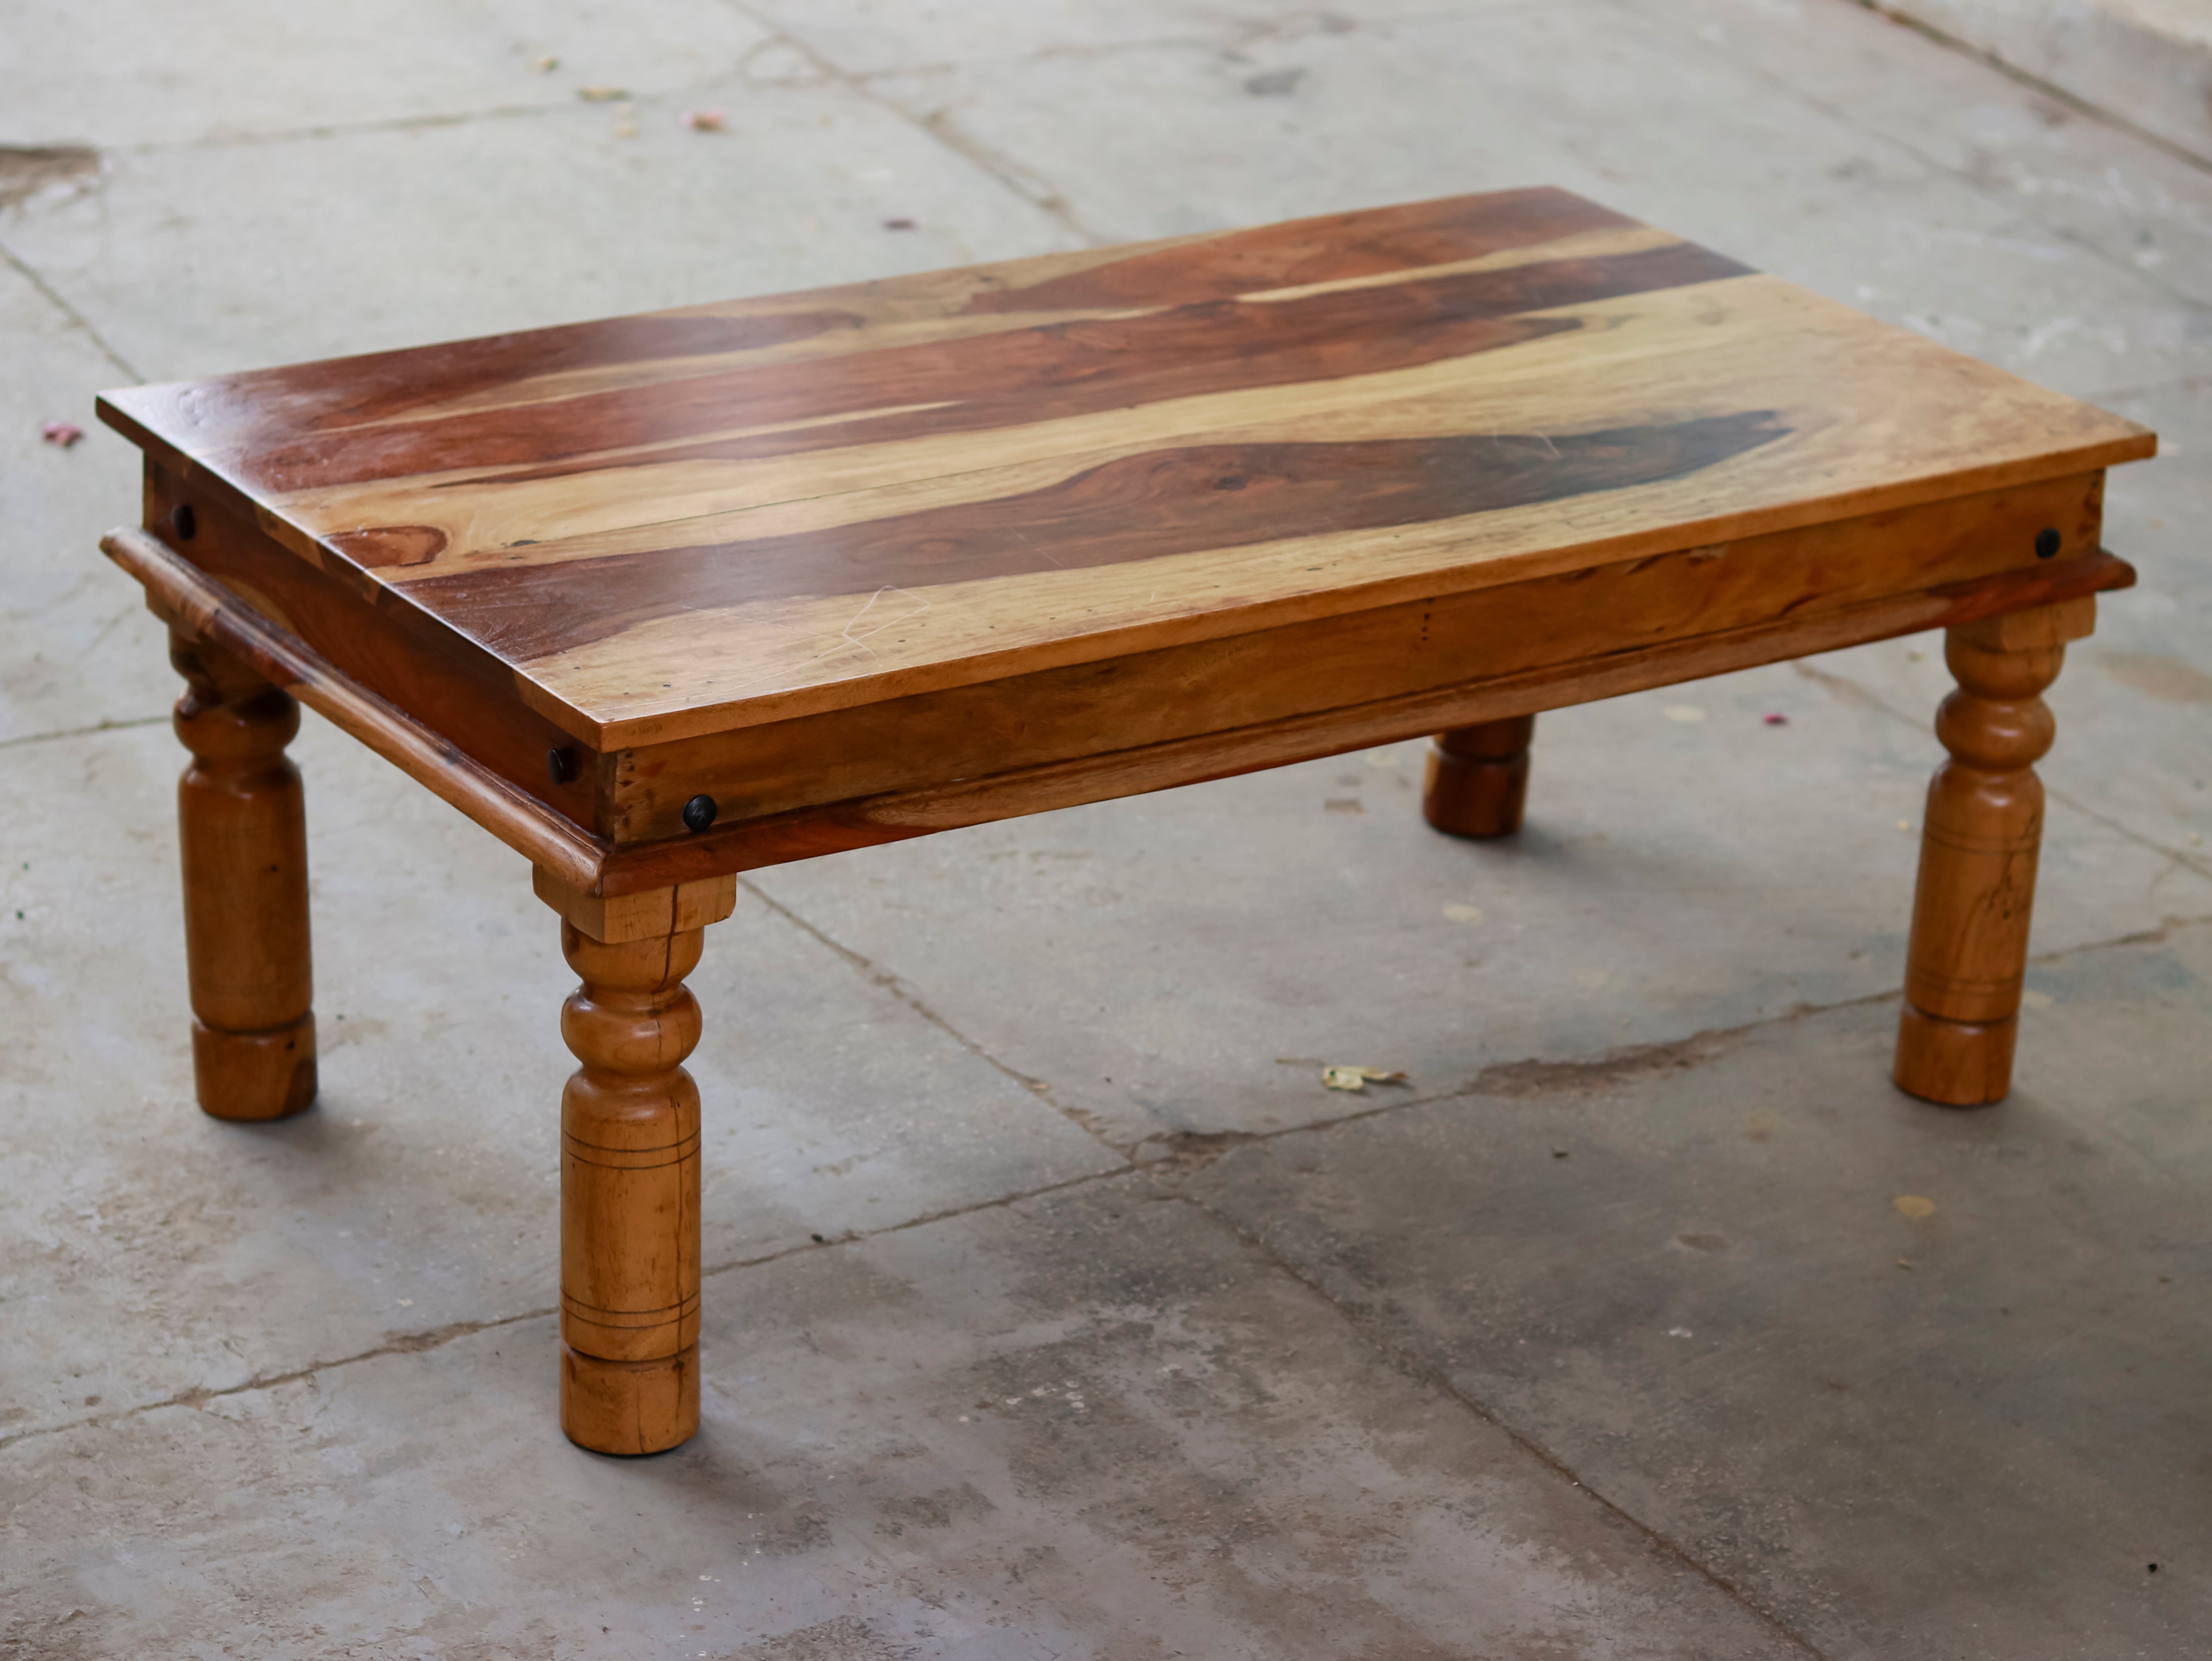 Simple Rounded Leg Table